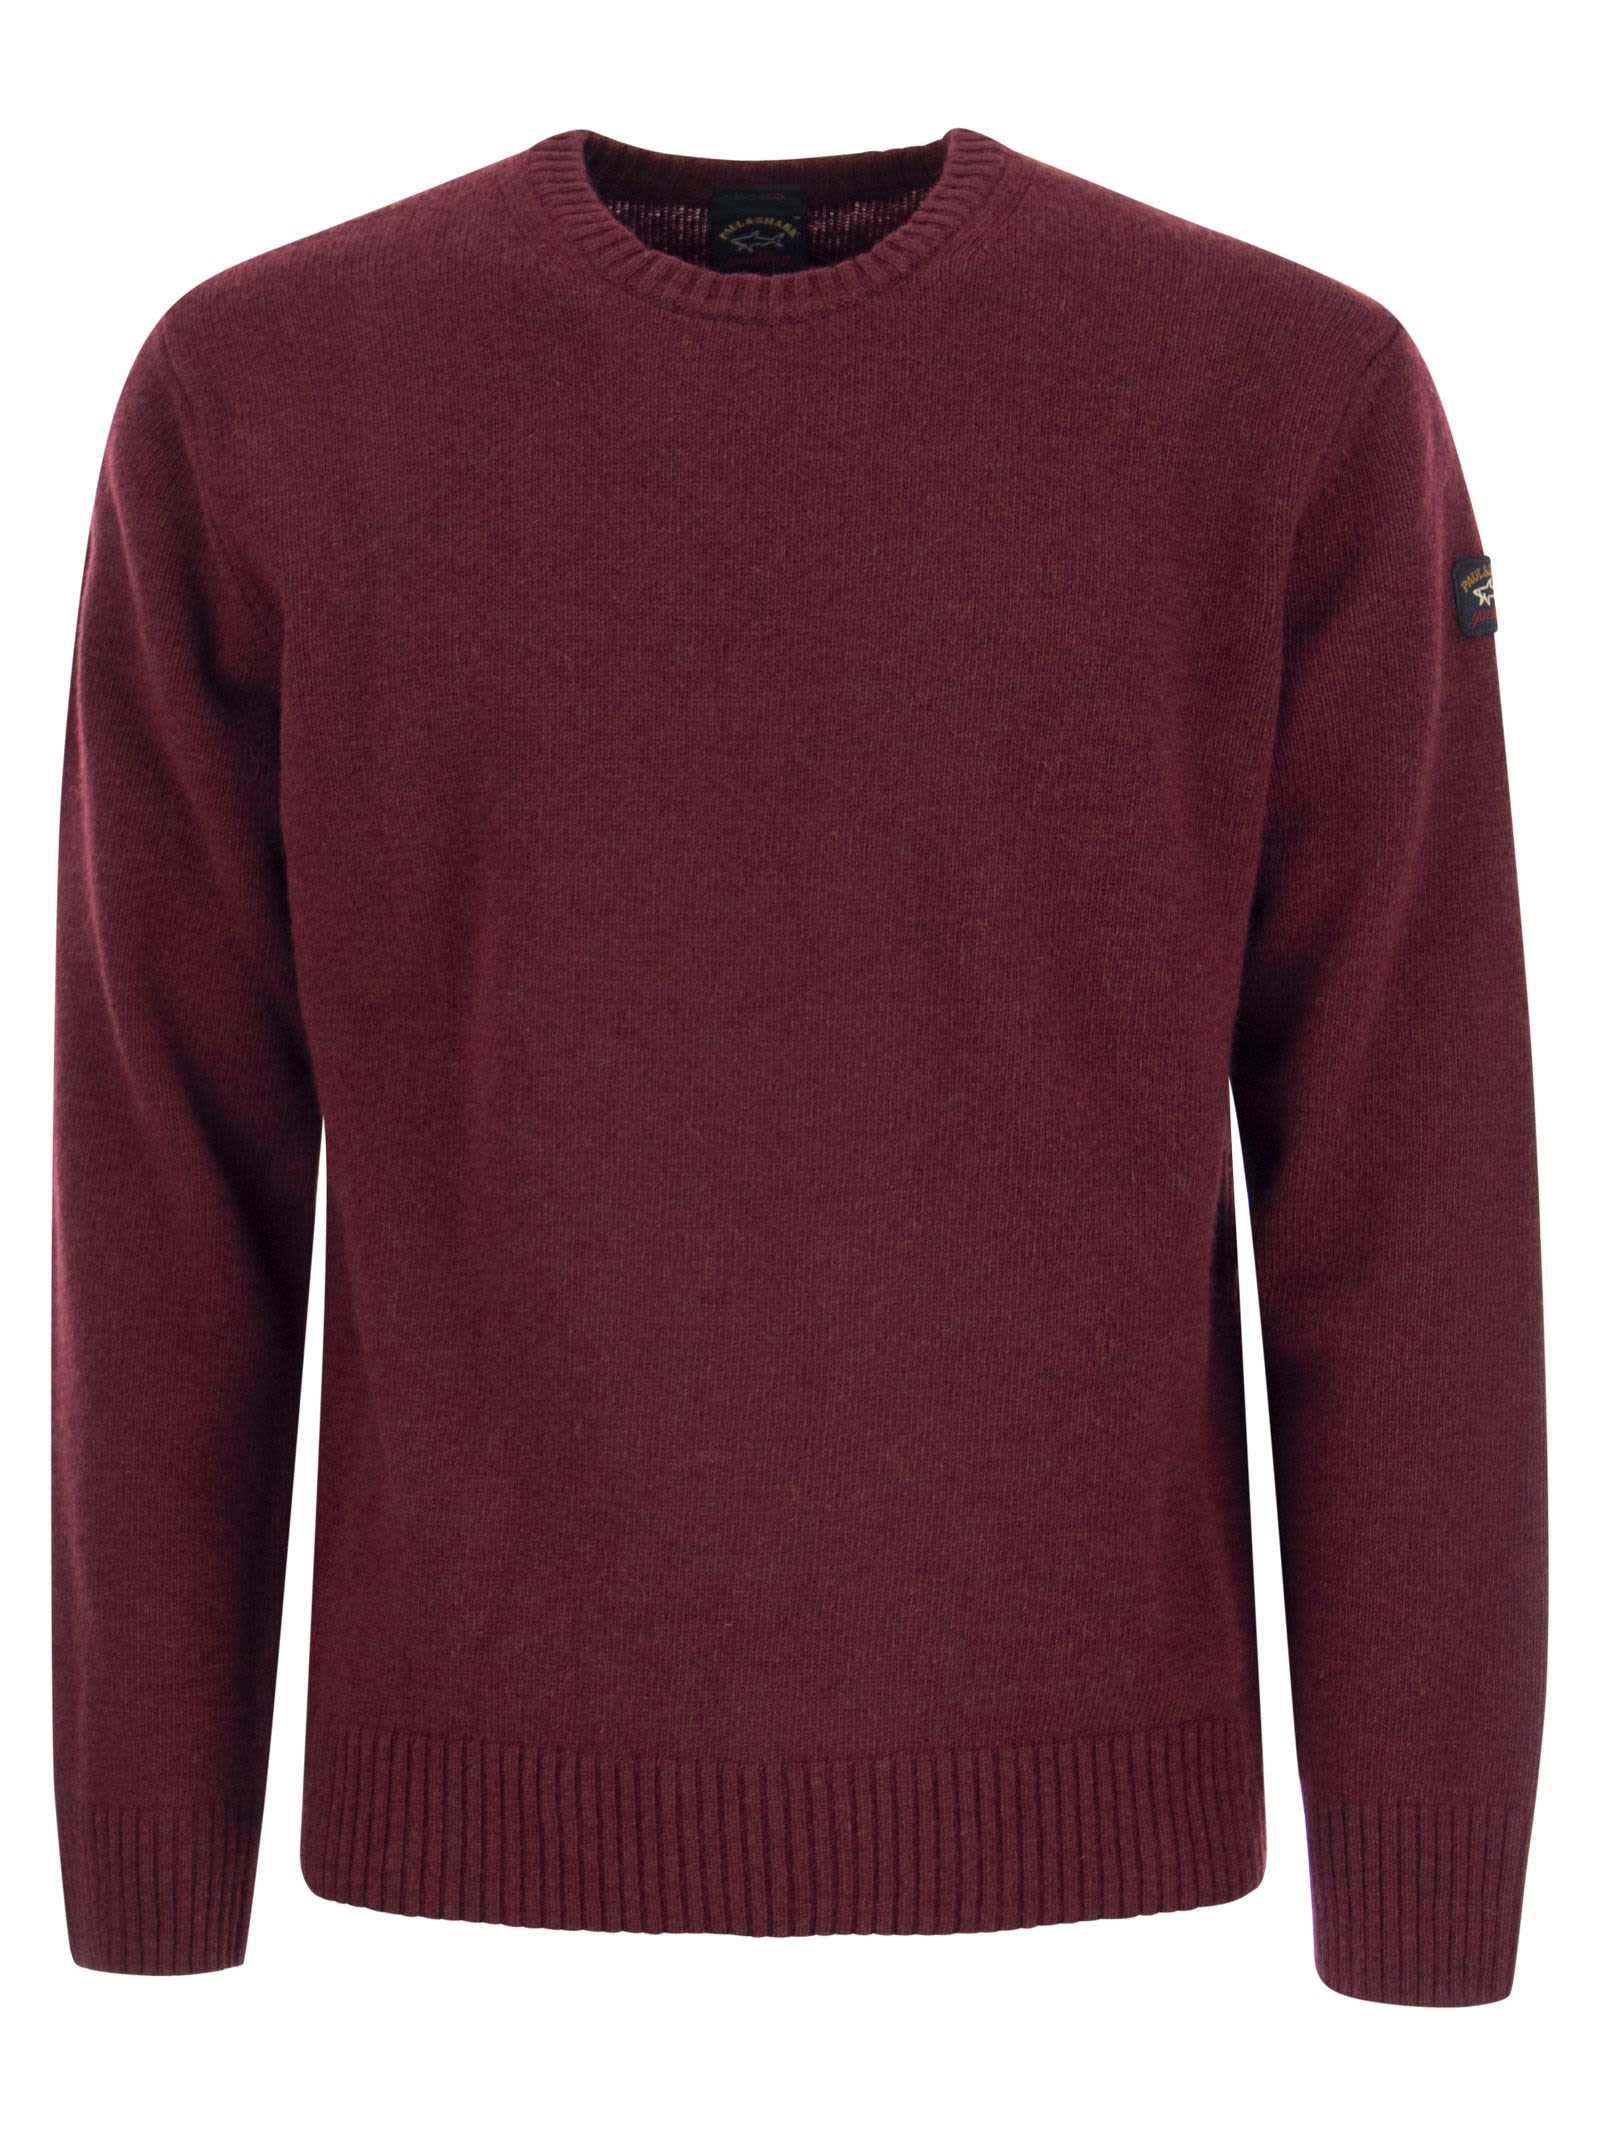 Wool Crew Neck With Arm Patch Sweater